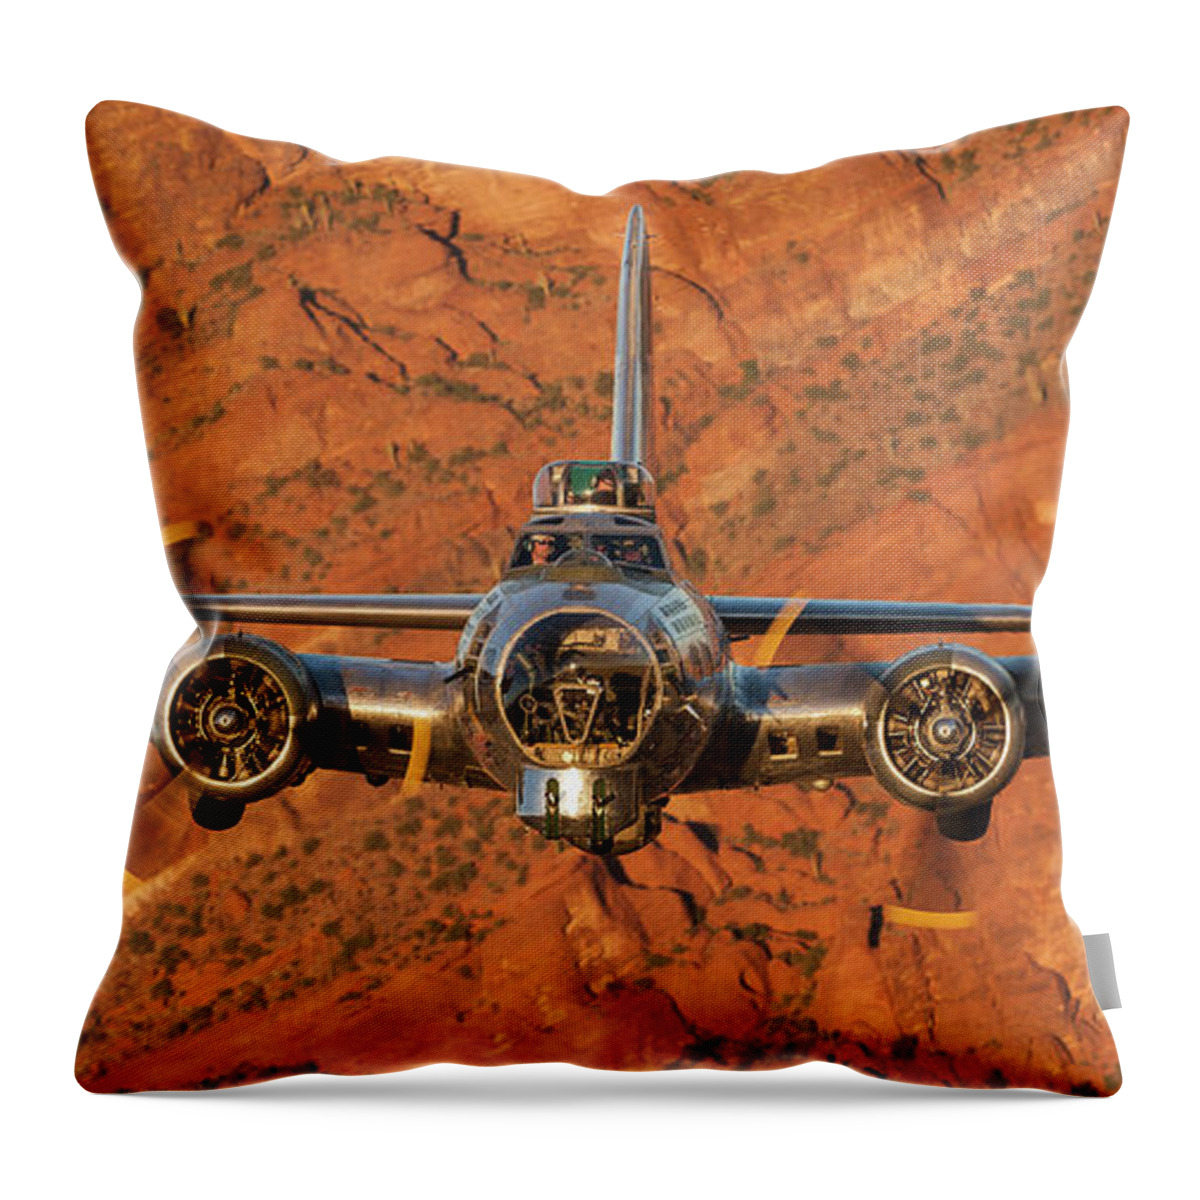 A2a Throw Pillow featuring the photograph I Think We're Being Followed by Jay Beckman